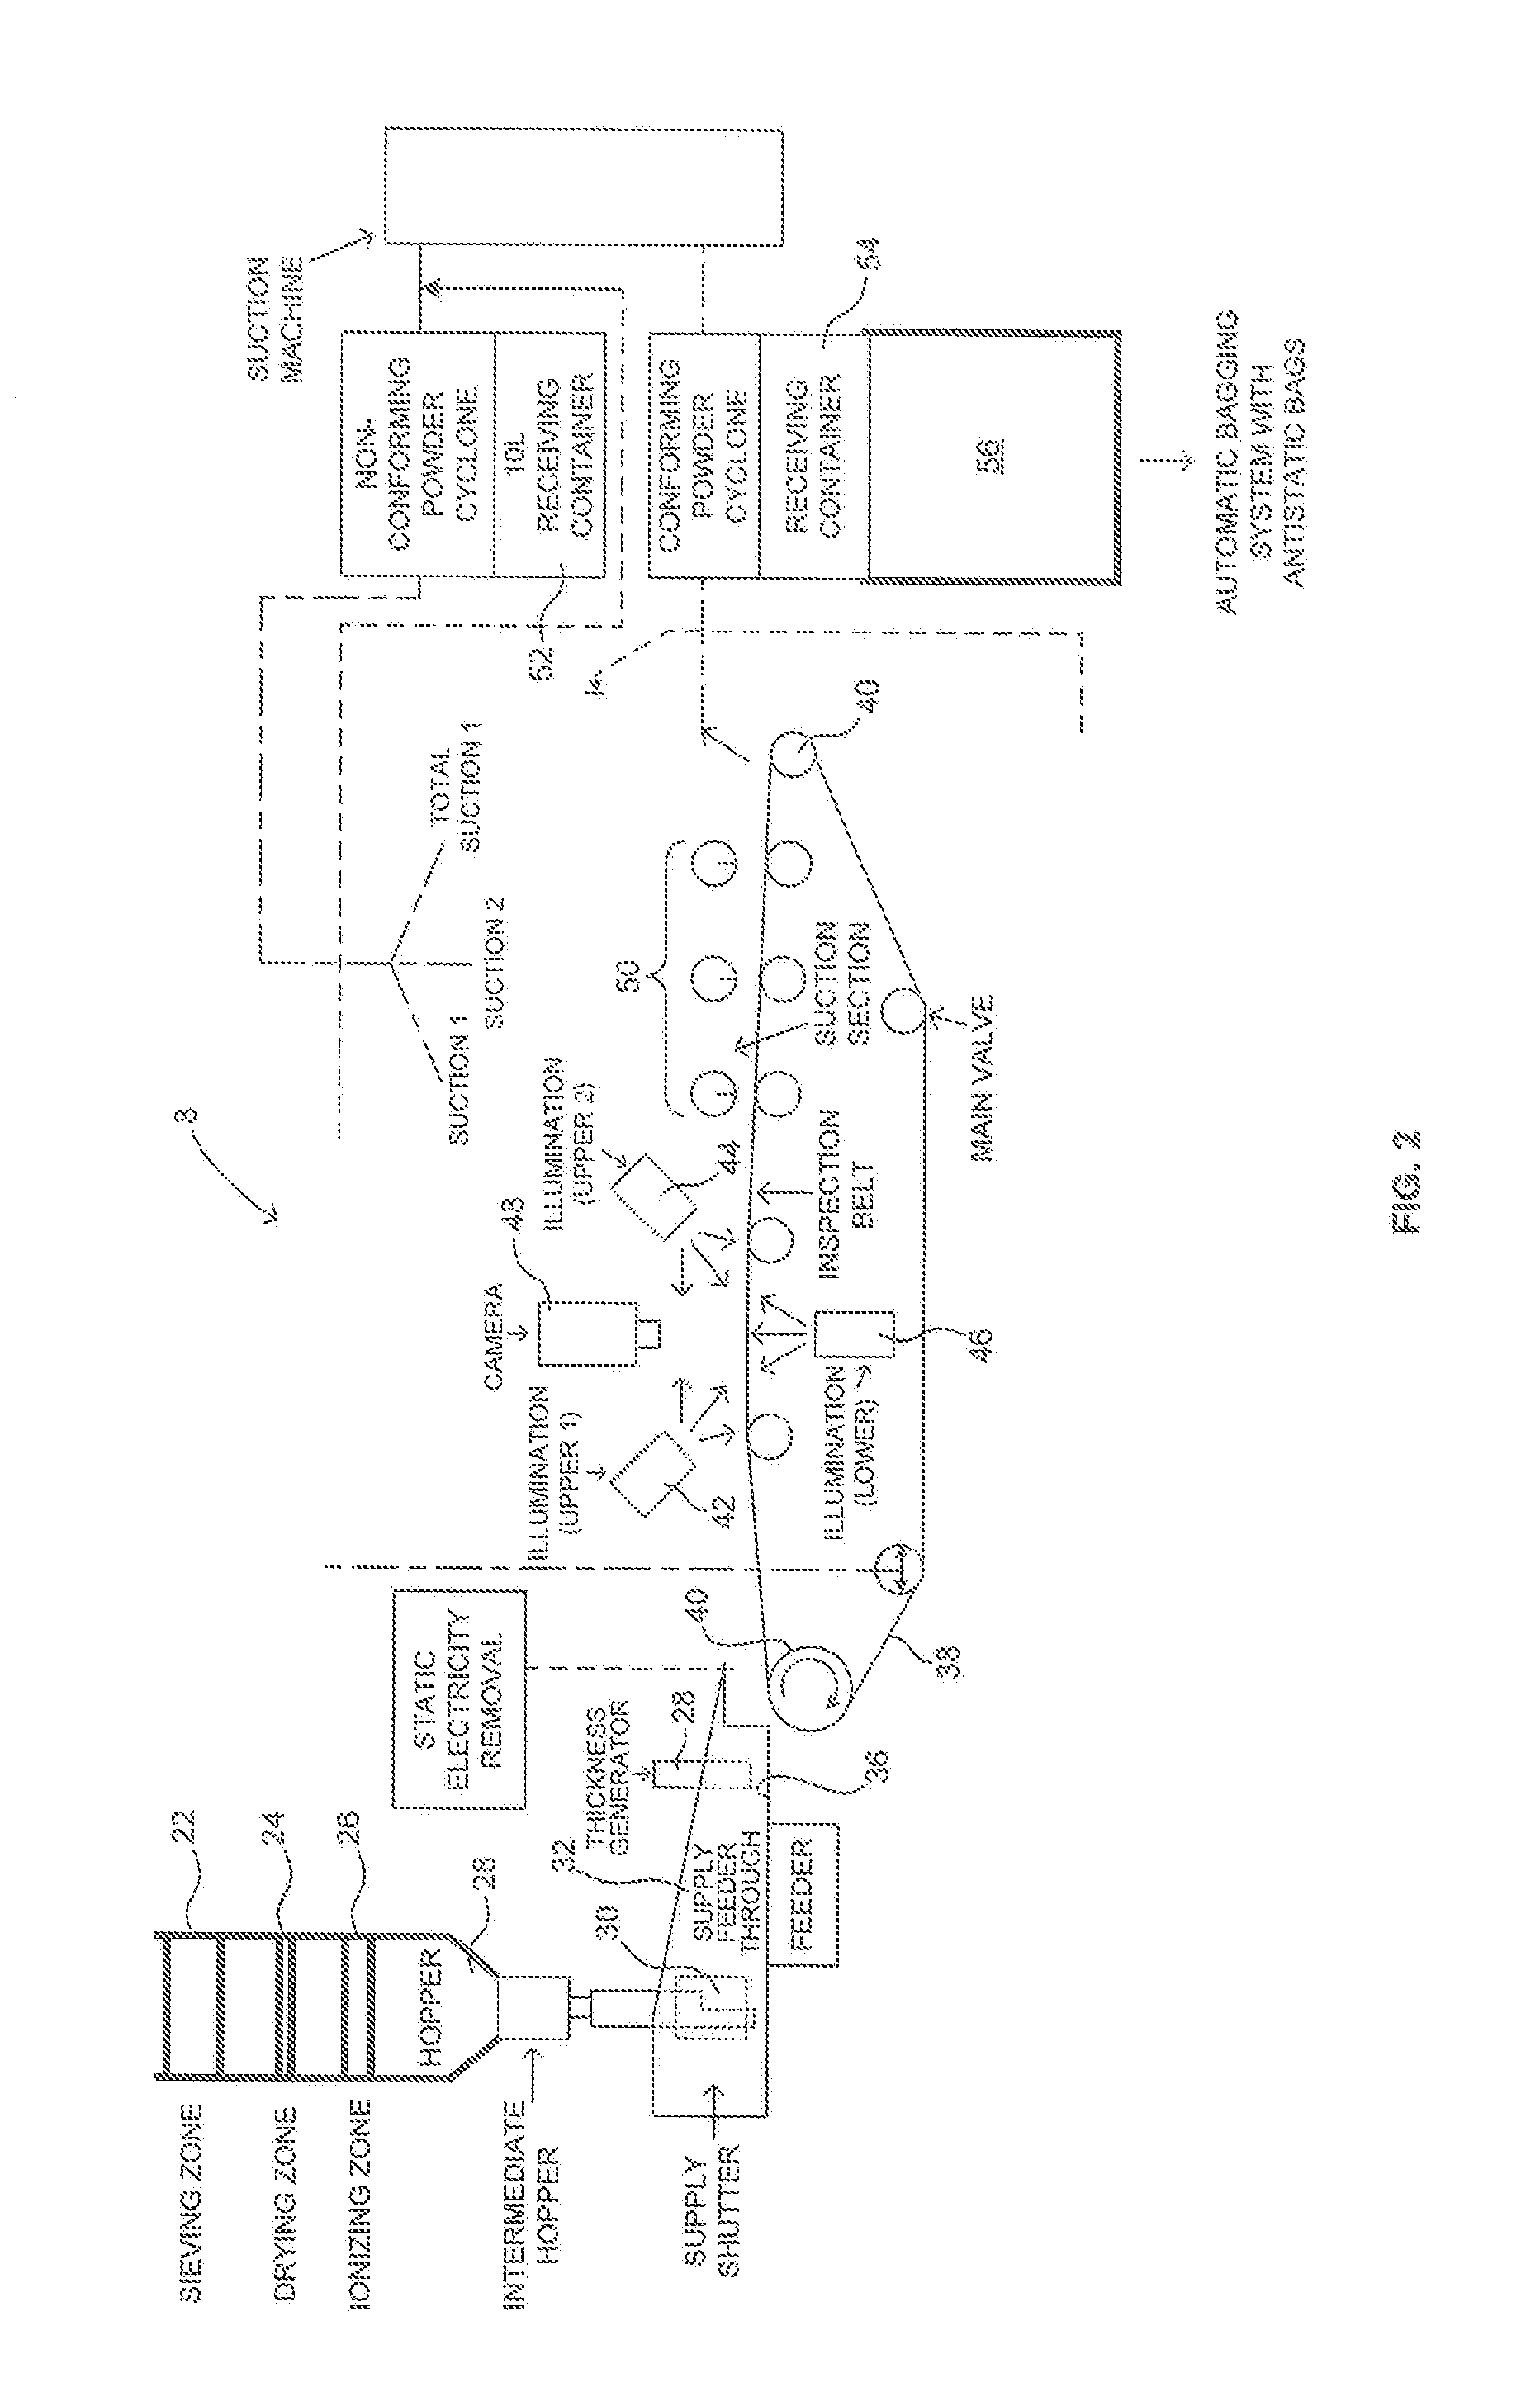 Process for removing contaminants from polymeric powders